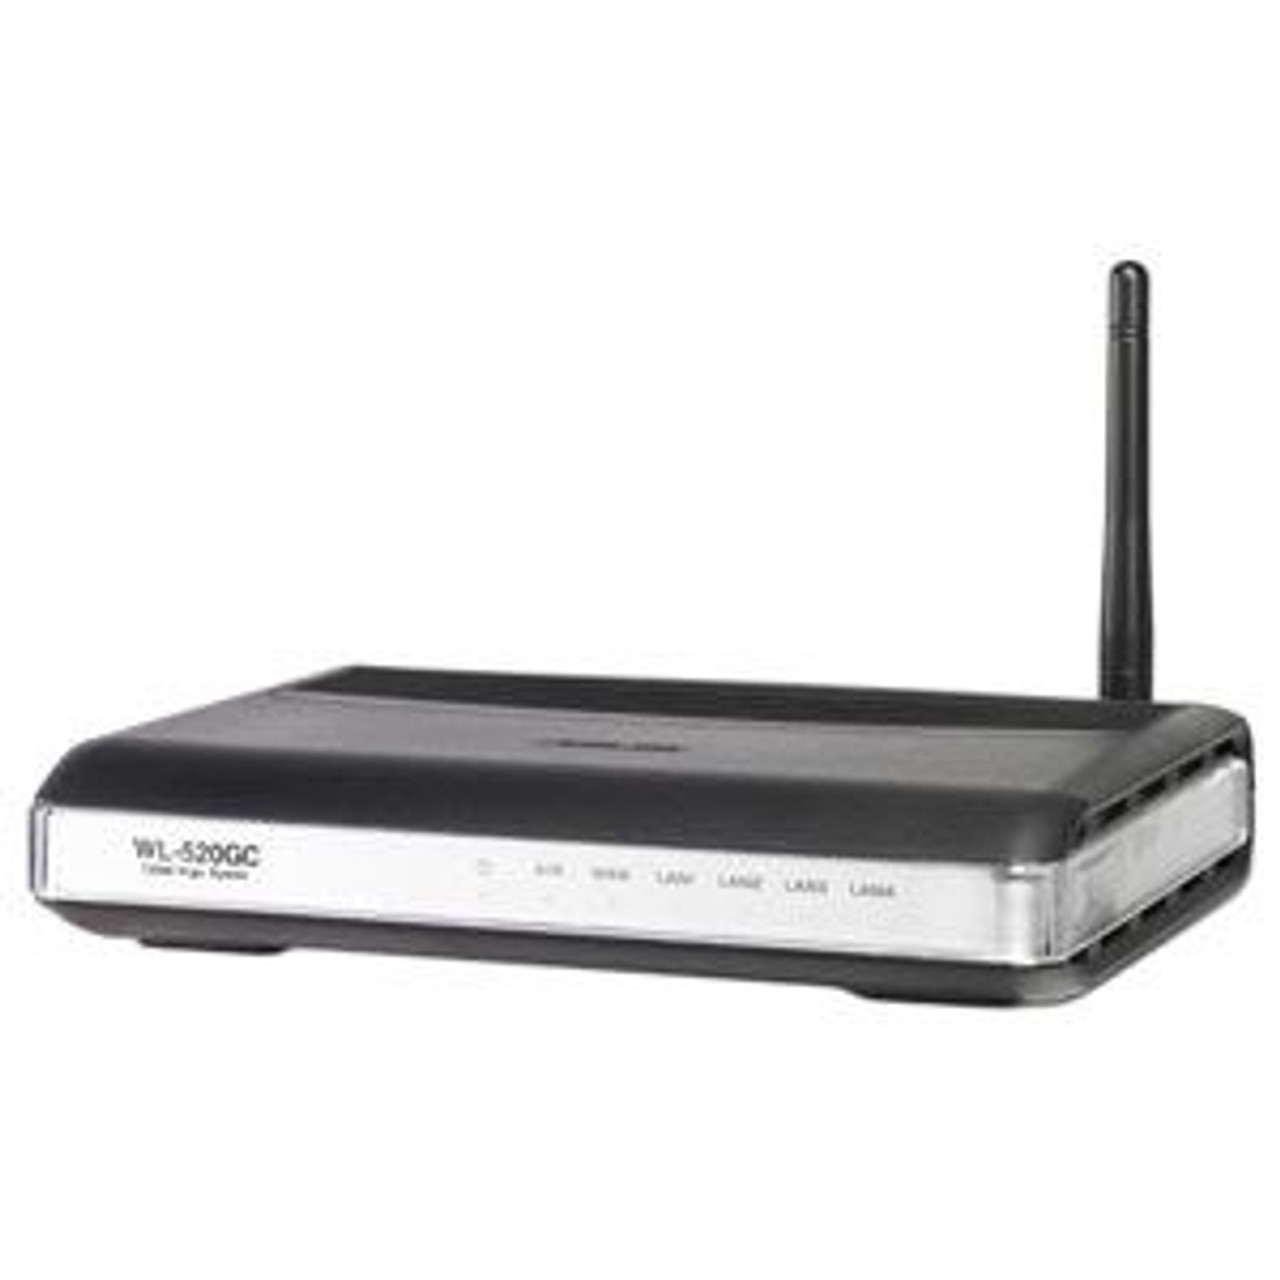 90-ID8002A00-01PZ ASUS WL-520GC Broad Range Wireless Router (Refurbished)